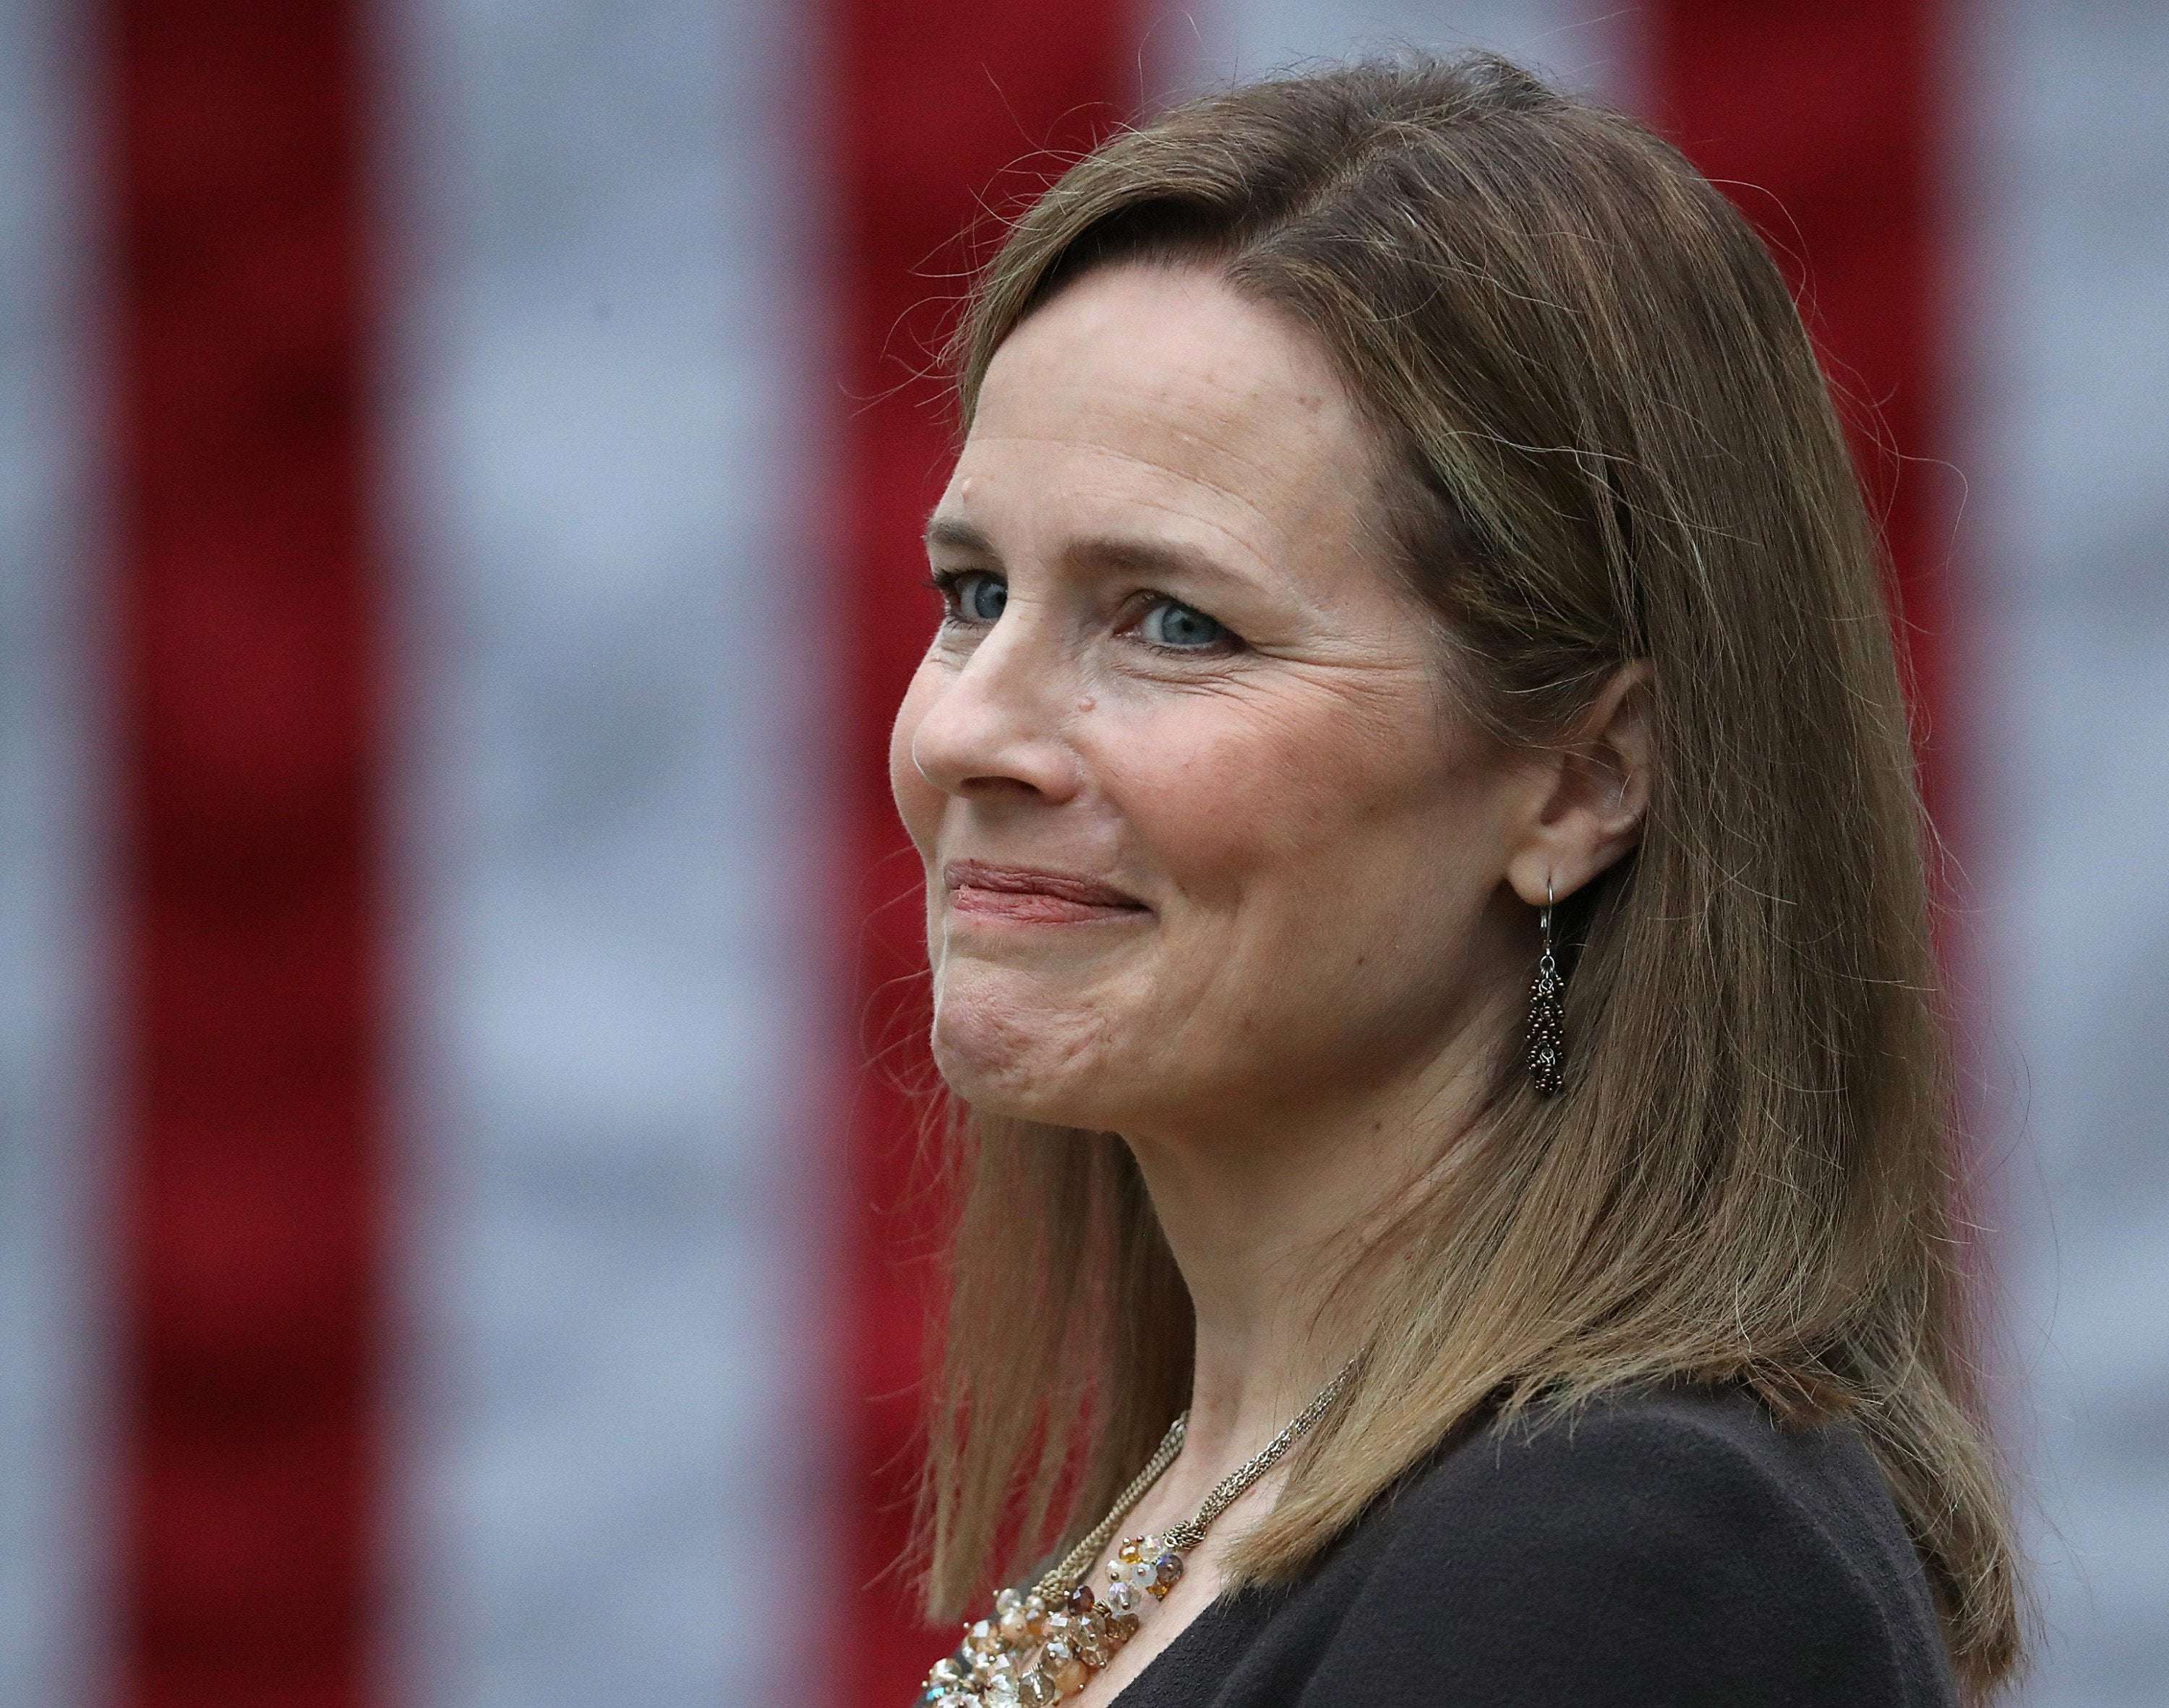 image for Democrats planning 30-hour 'digital filibuster' to try to stop Amy Coney Barrett being confirmed